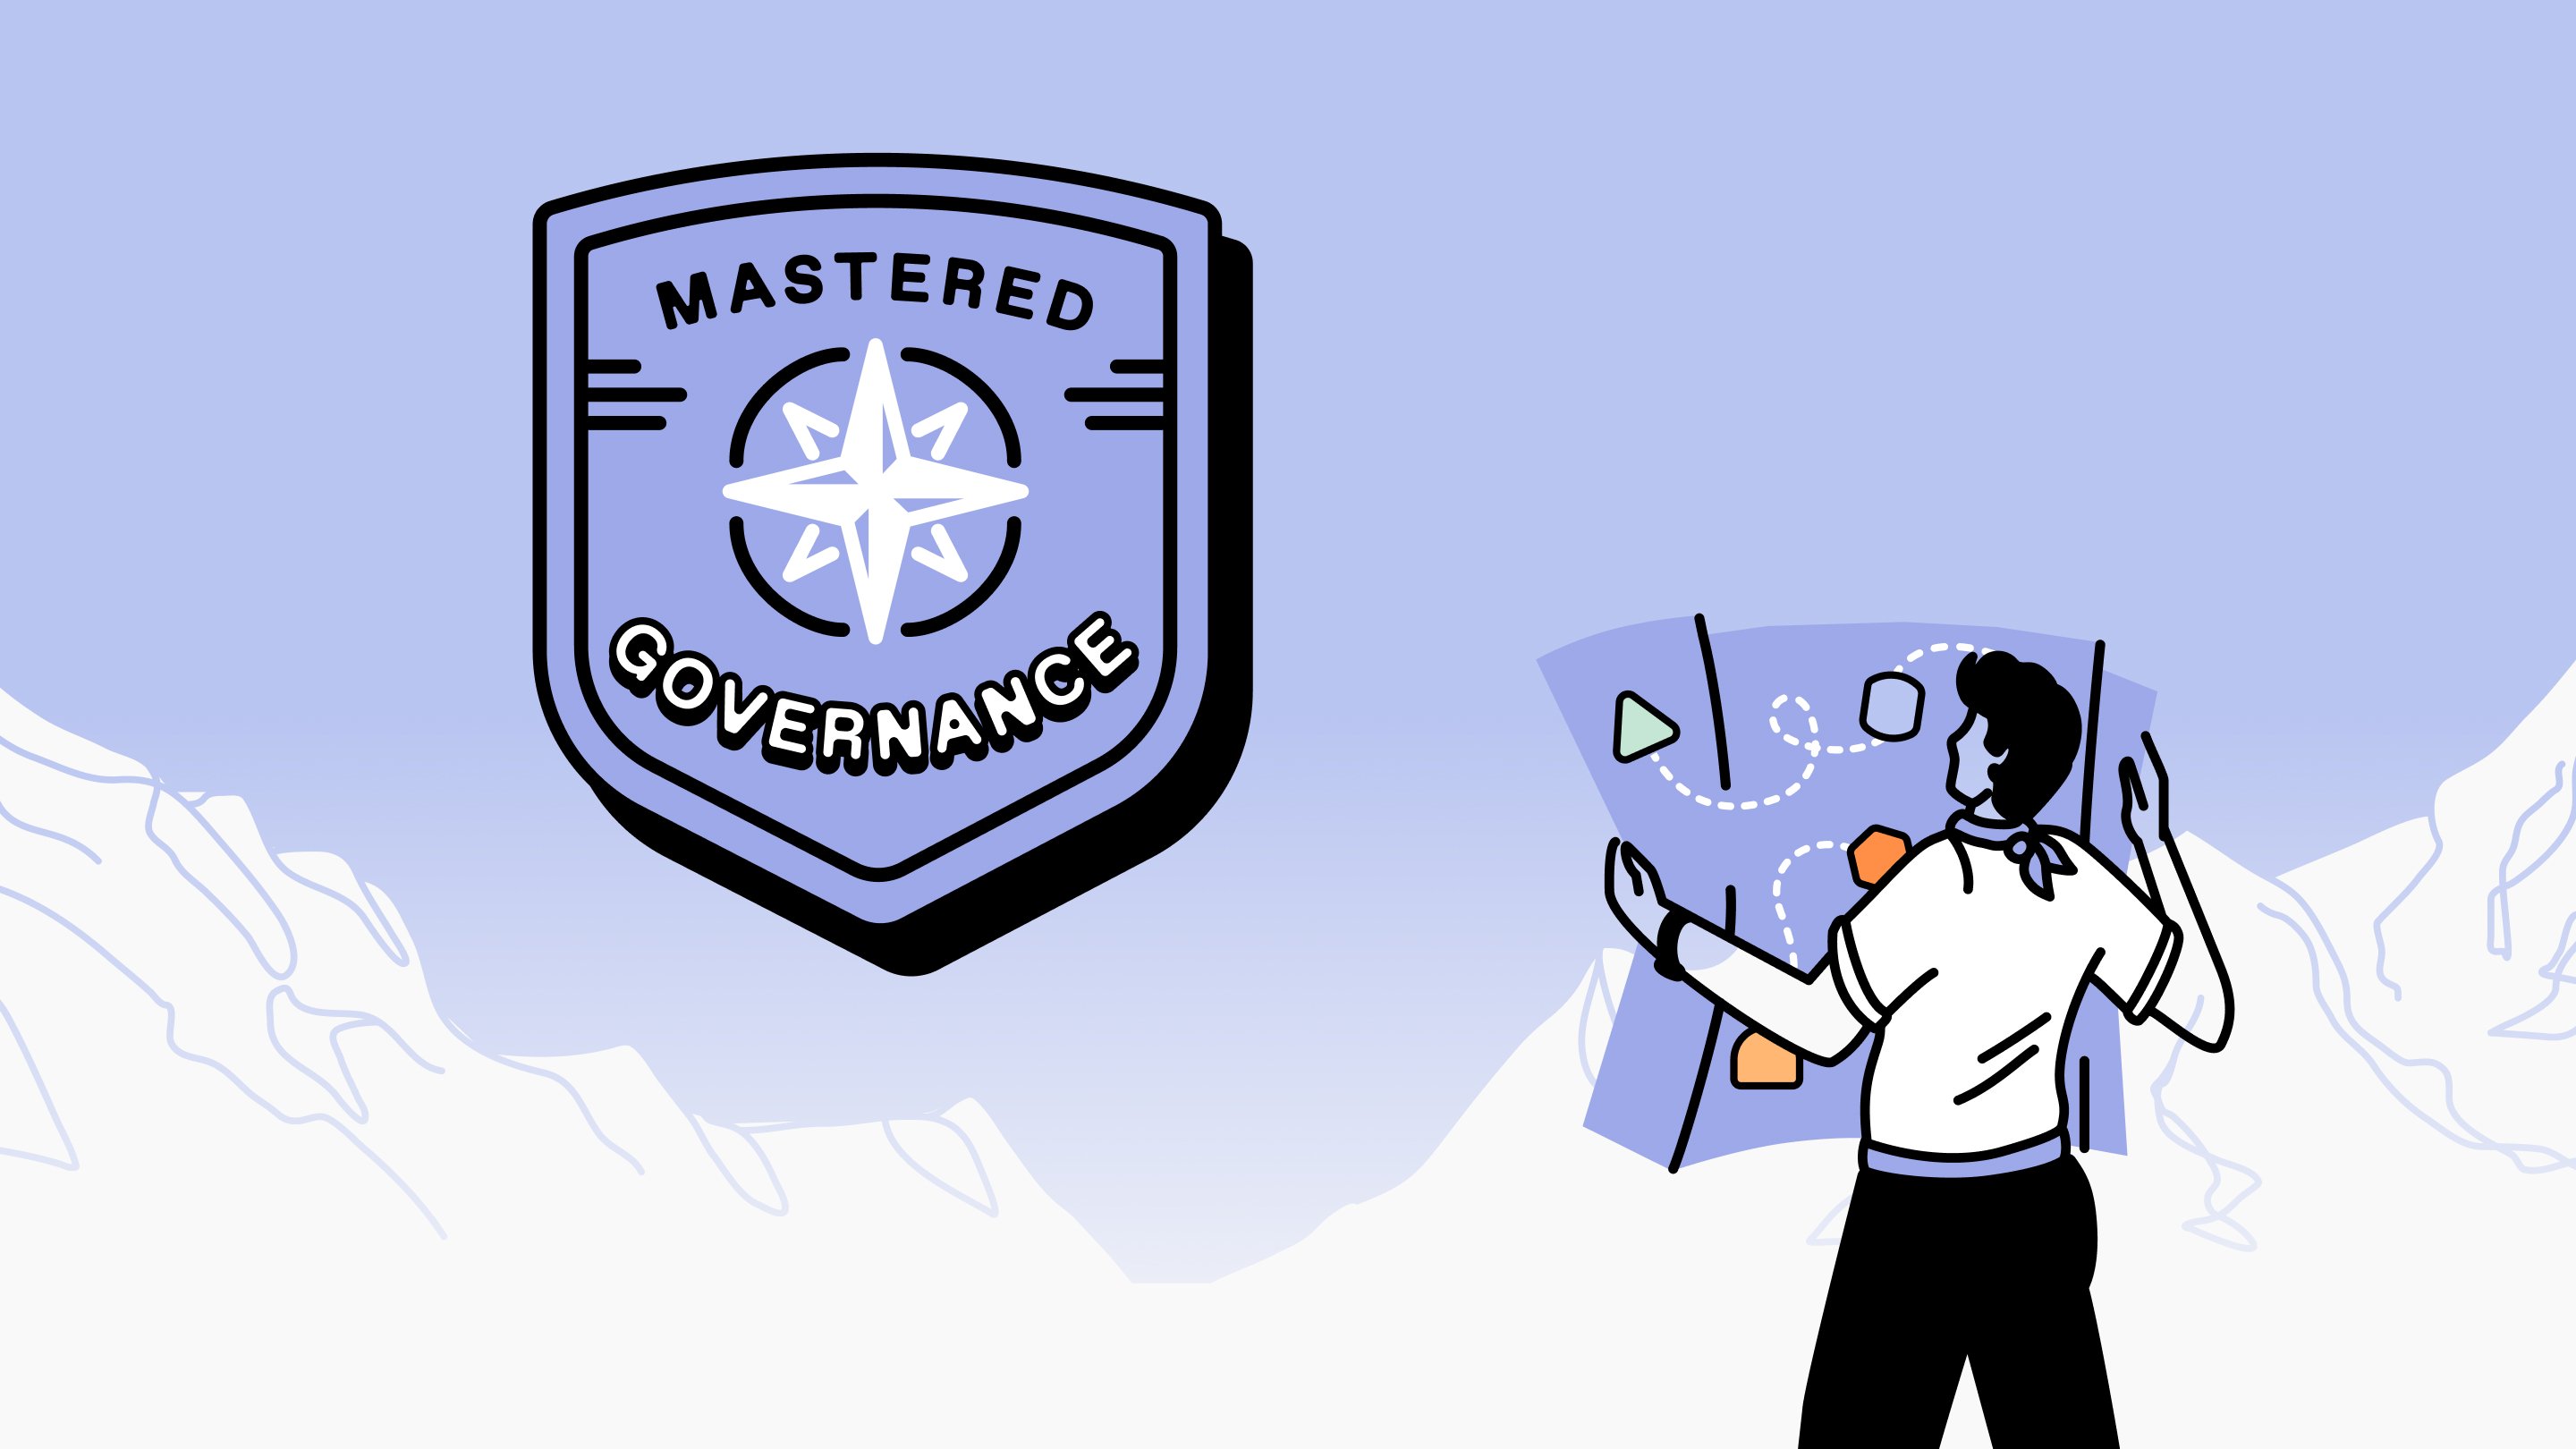 Featured Governance course